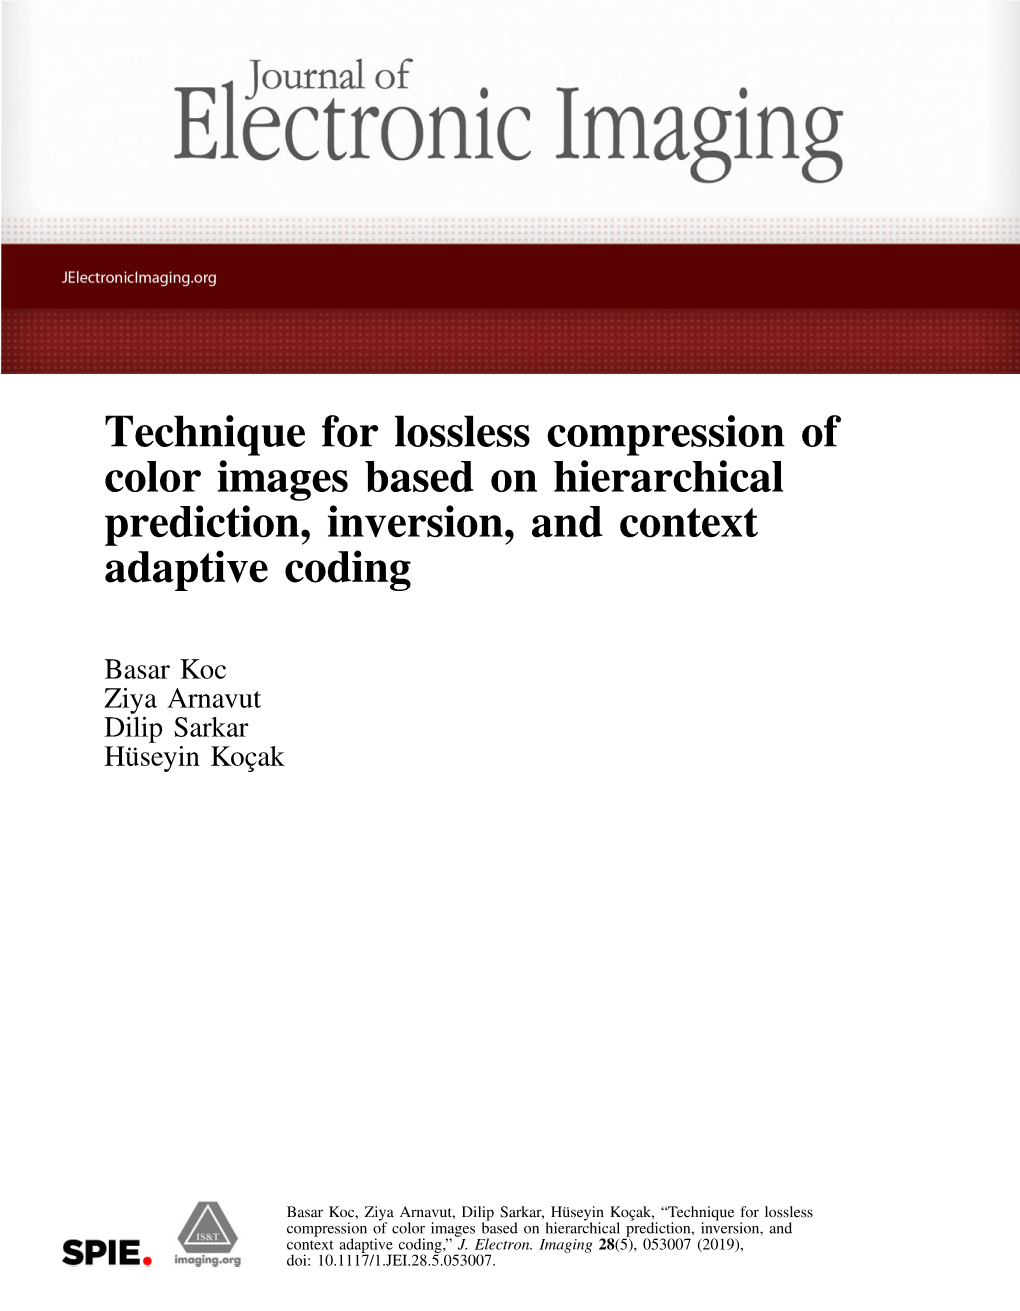 Technique for Lossless Compression of Color Images Based on Hierarchical Prediction, Inversion, and Context Adaptive Coding